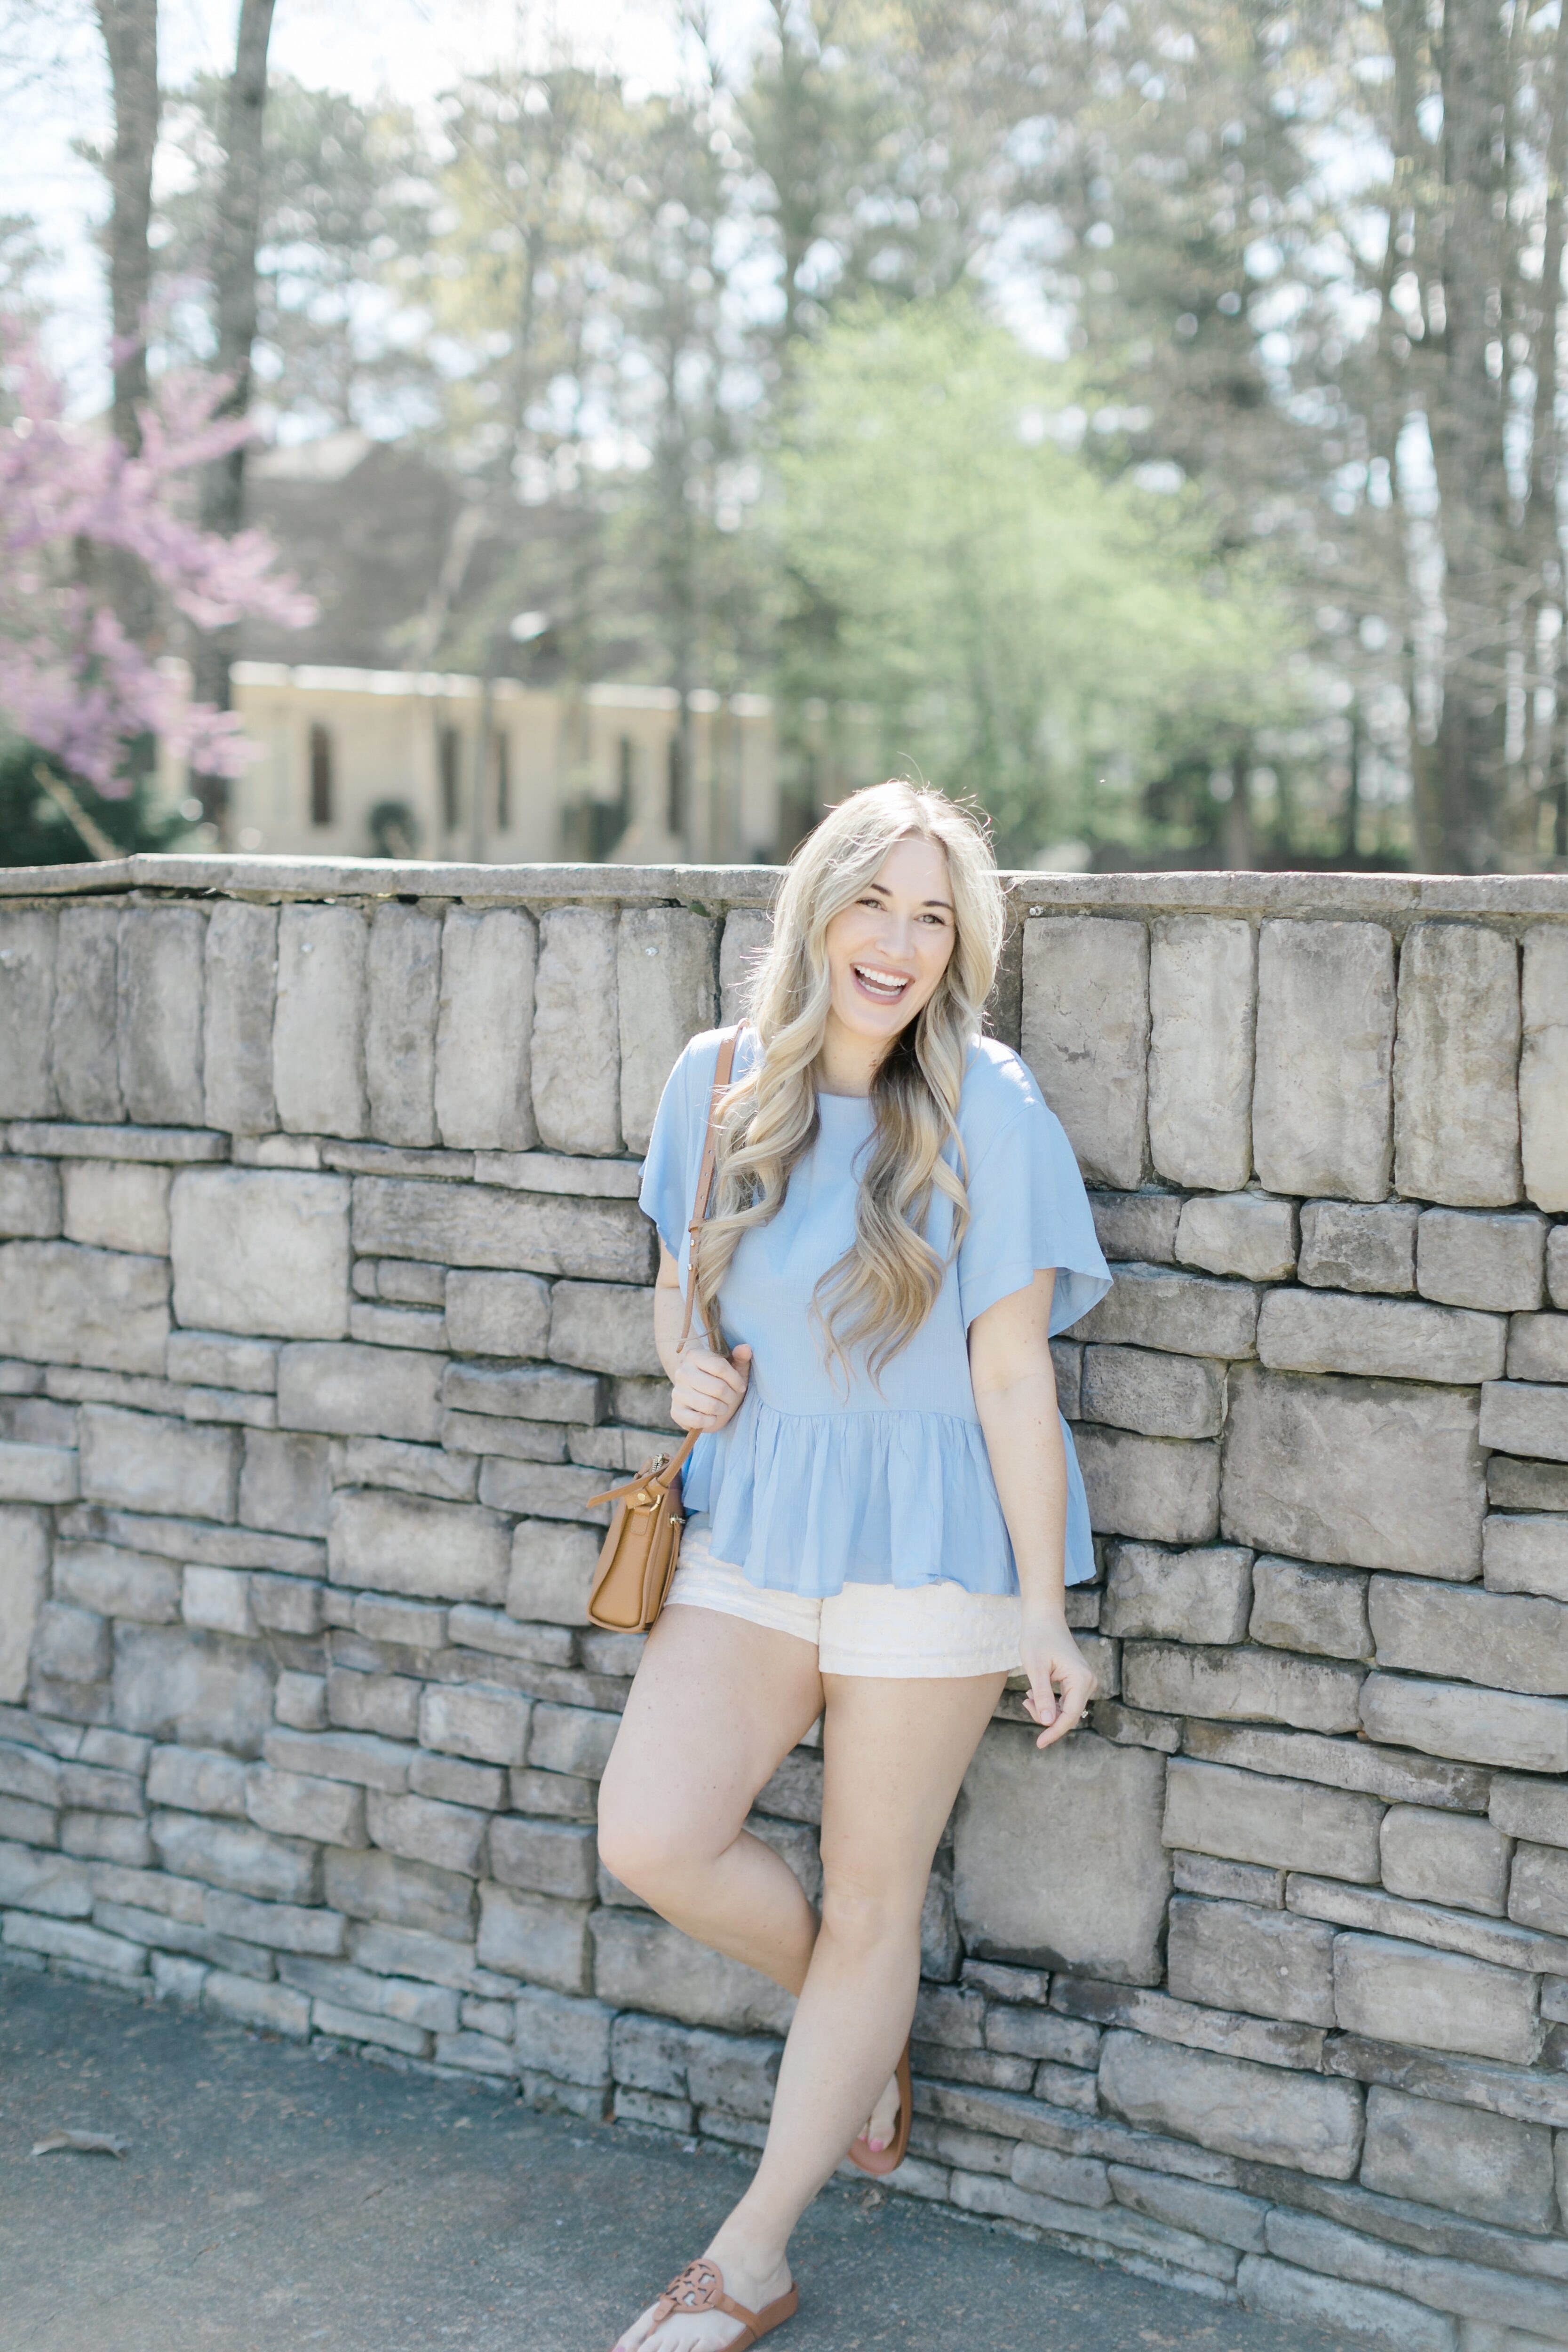 Cute spring shorts for women styled by top Memphis fashion blogger, Walking in Memphis in High Heels: image of a woman wearing Altar'd State shorts